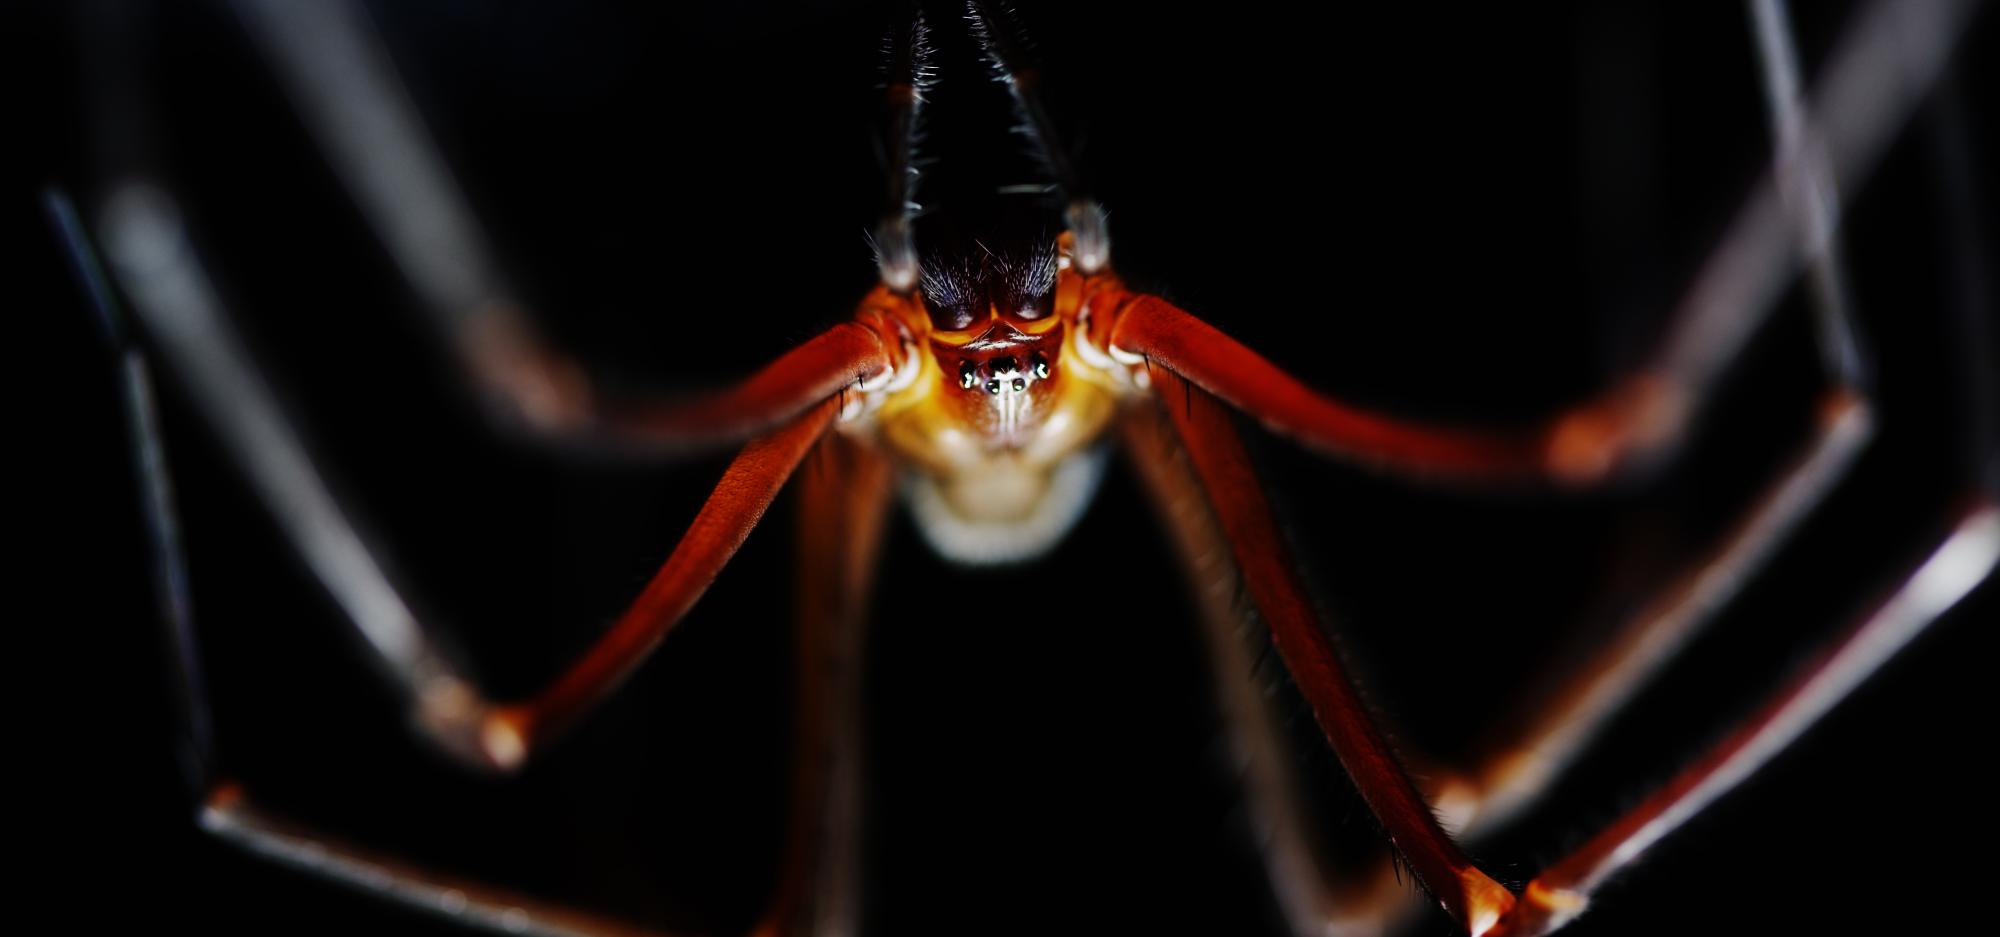 Header image of a spider looking creature